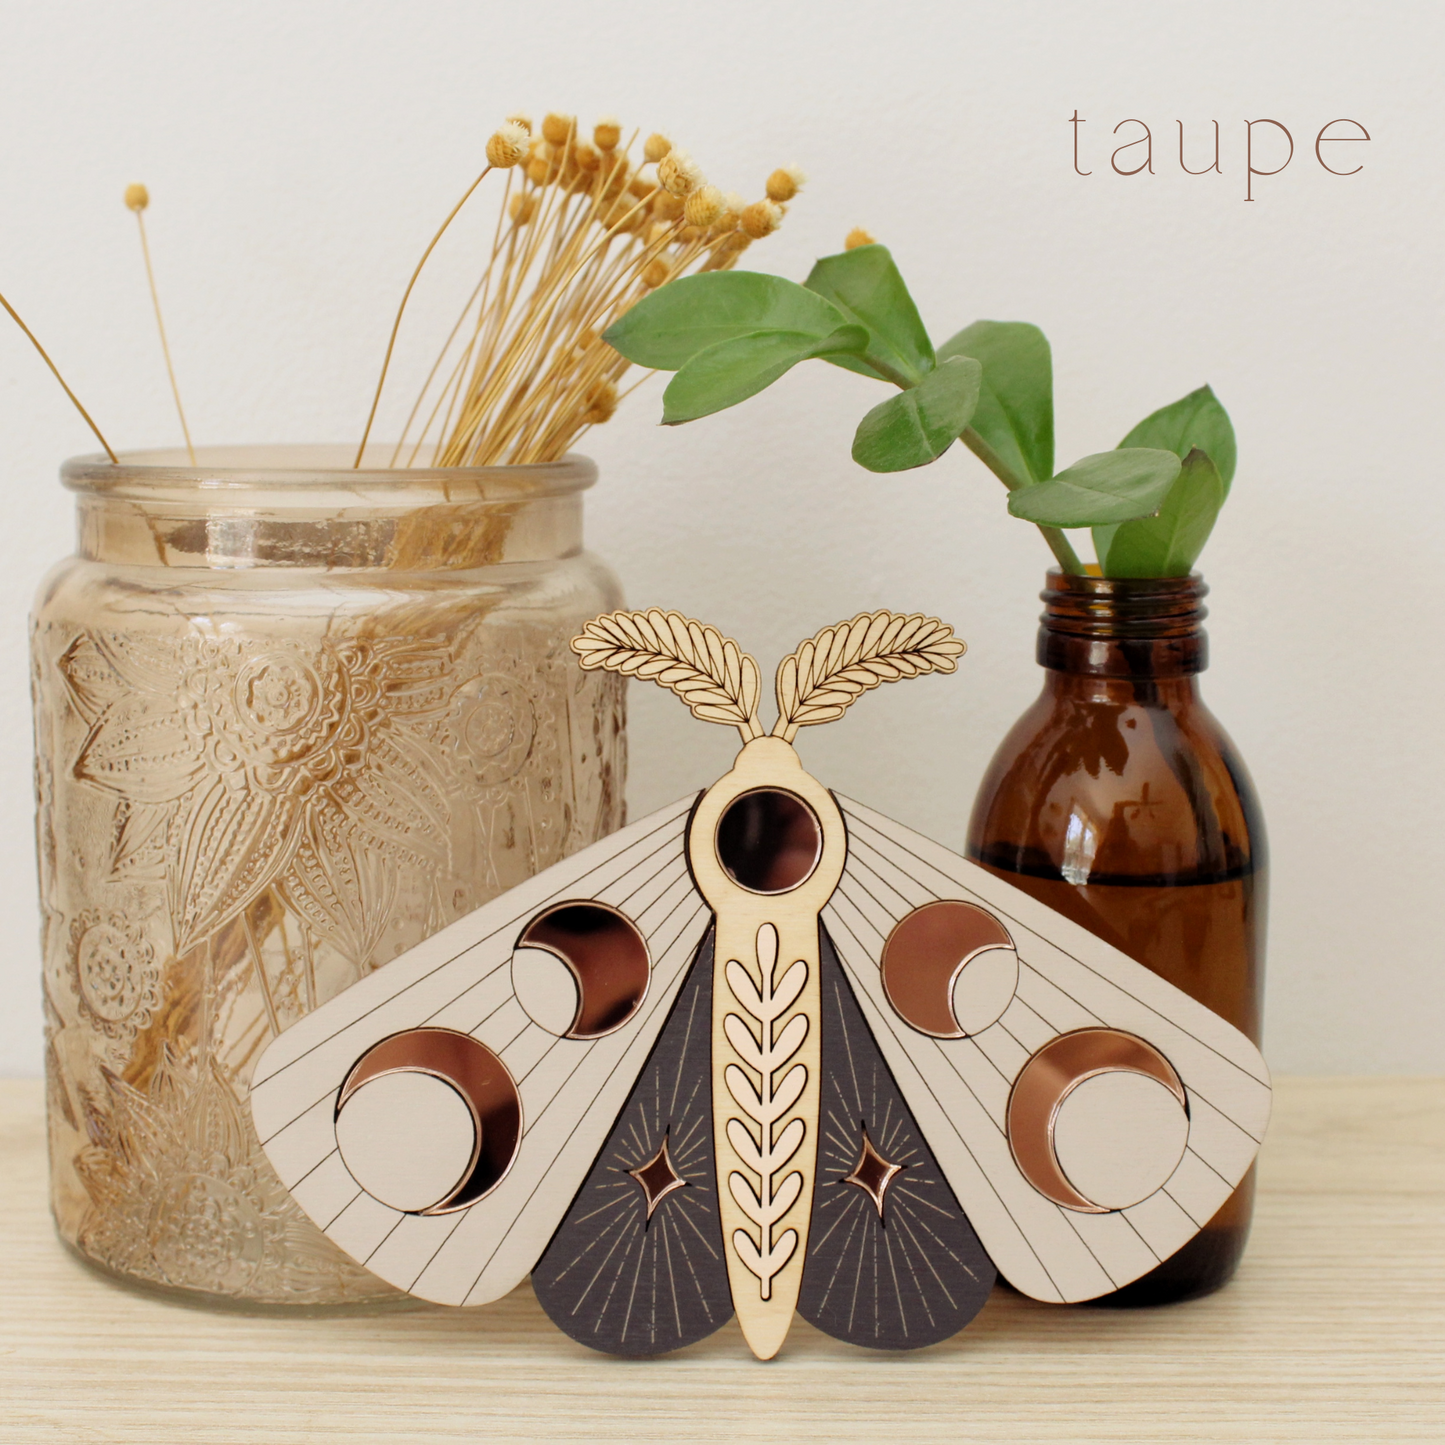 wooden moth with moon phase design. painted in deep plum and taupe with wood tones and mirrored rose gold moon phase inlays.